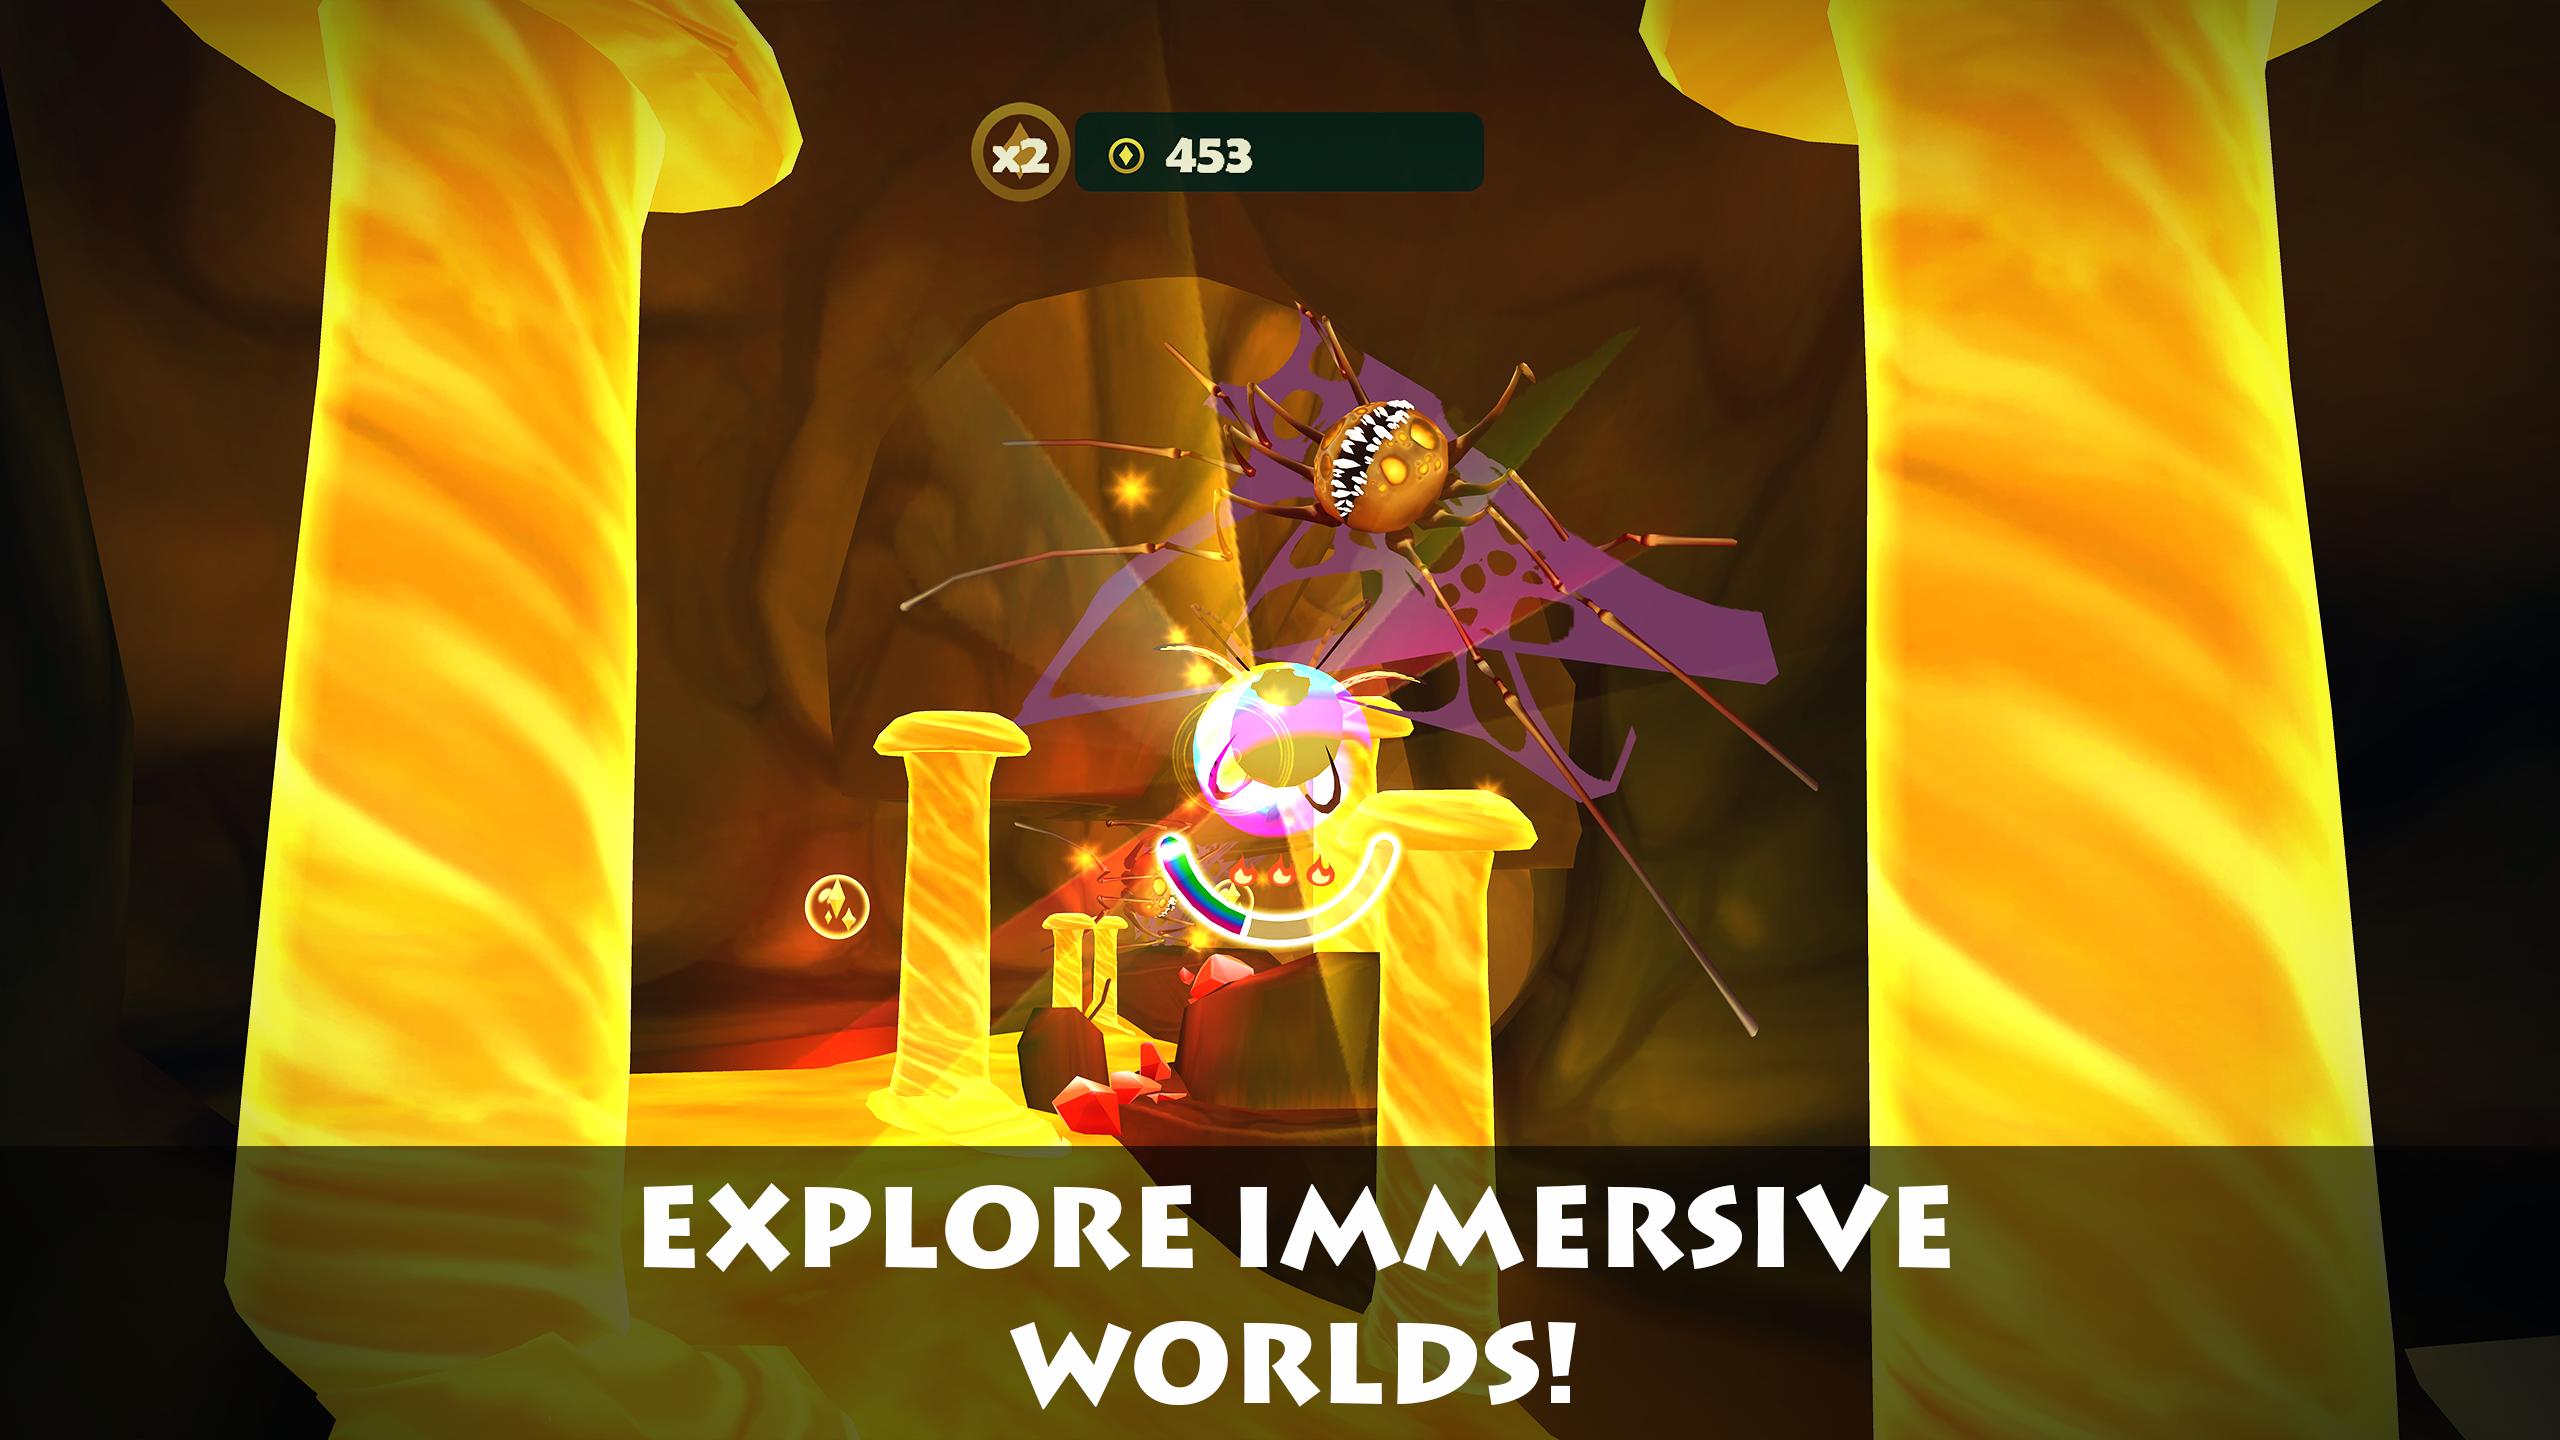 Lamper VR: Firefly Rescue for Android - APK Download